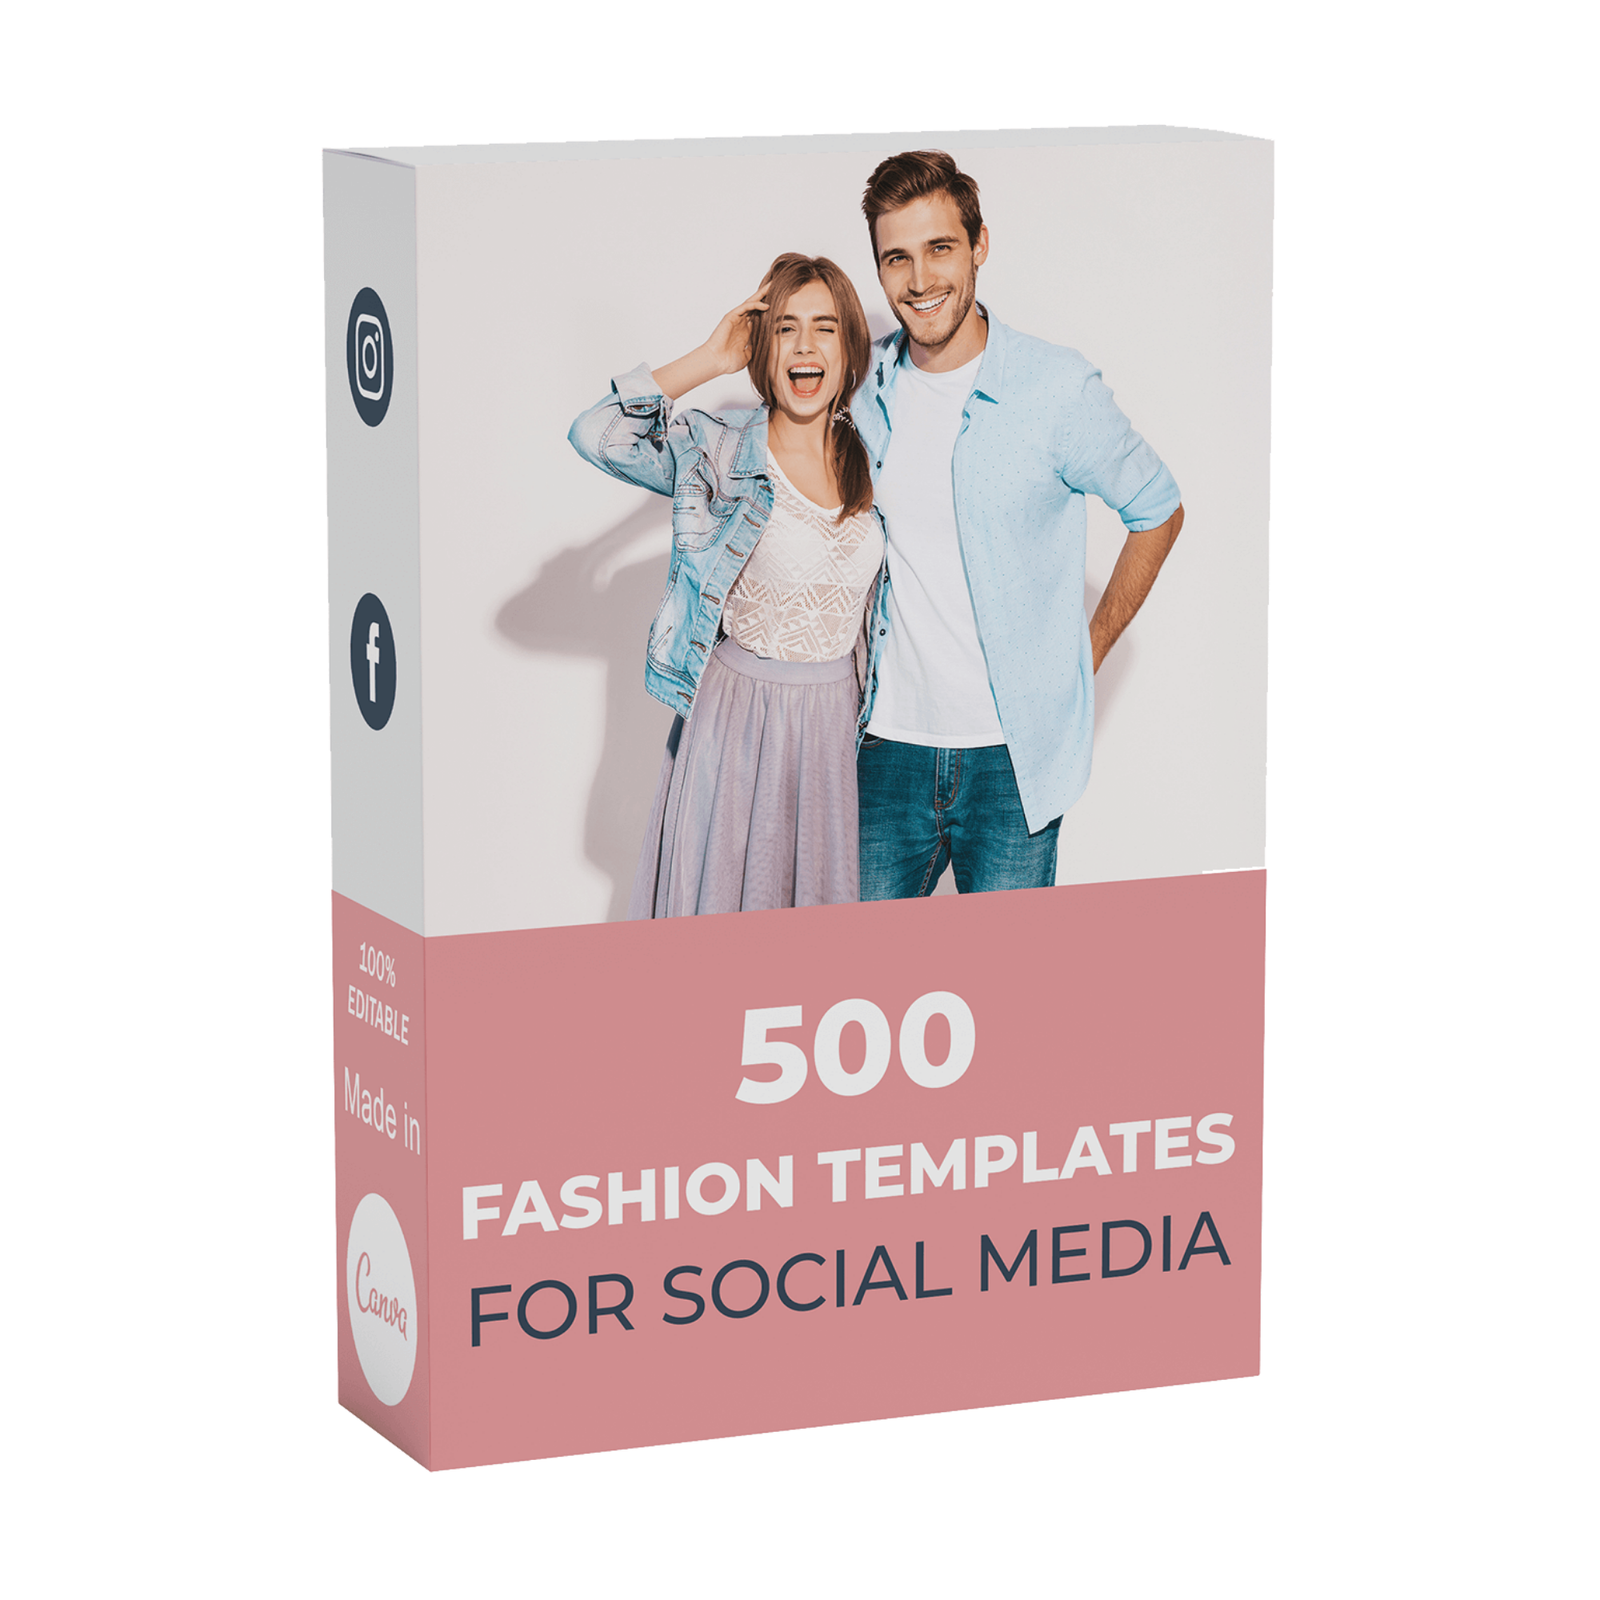 Fashion templates - 500 pack